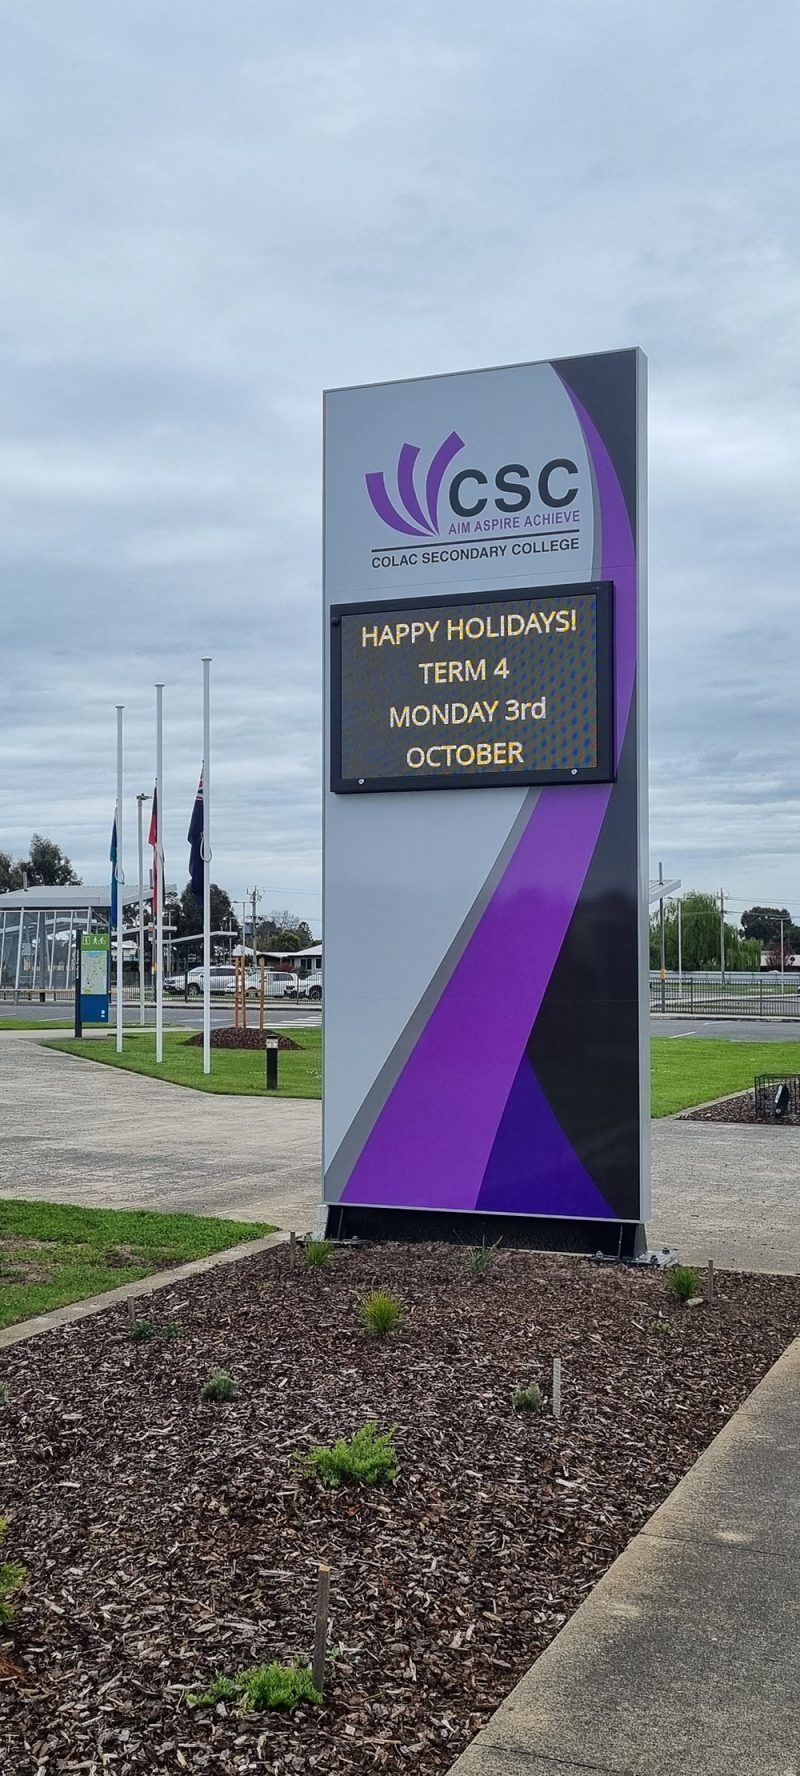 Colac Secondary College